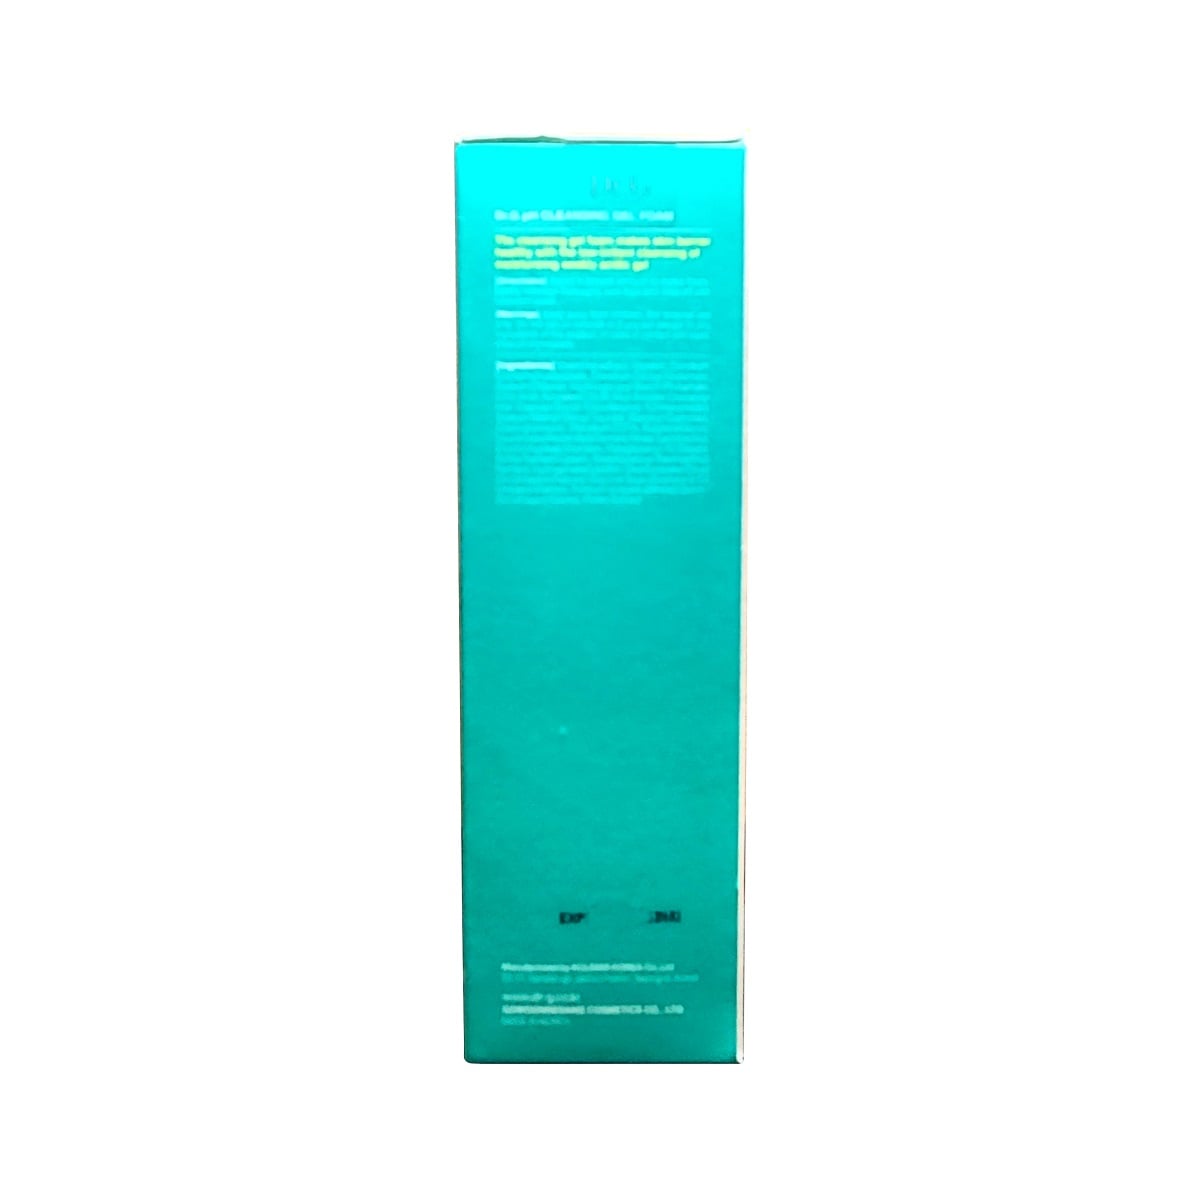 Ingredients, Cautions, Directions for Dr.G pH Cleansing Gel Foam (200 mL) in English